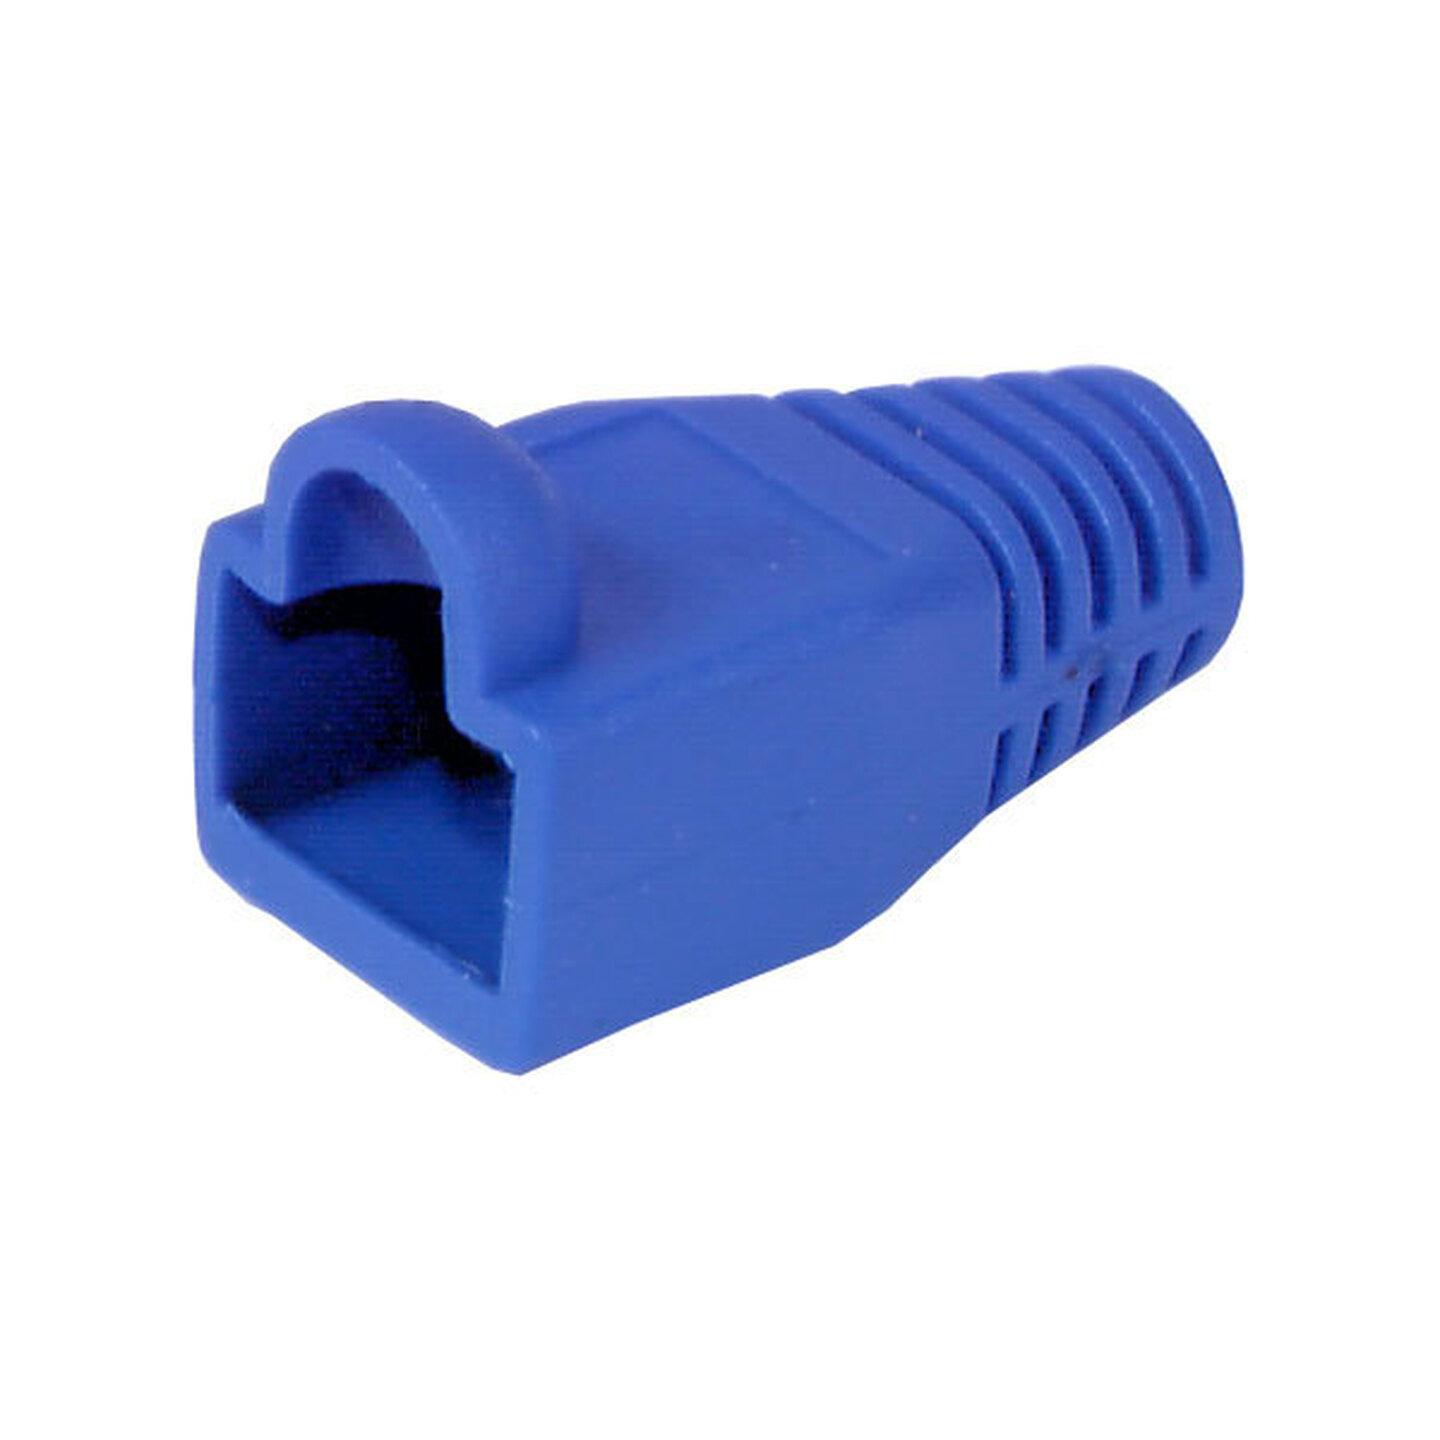 Blue RJ45 Boots - Pack of 50